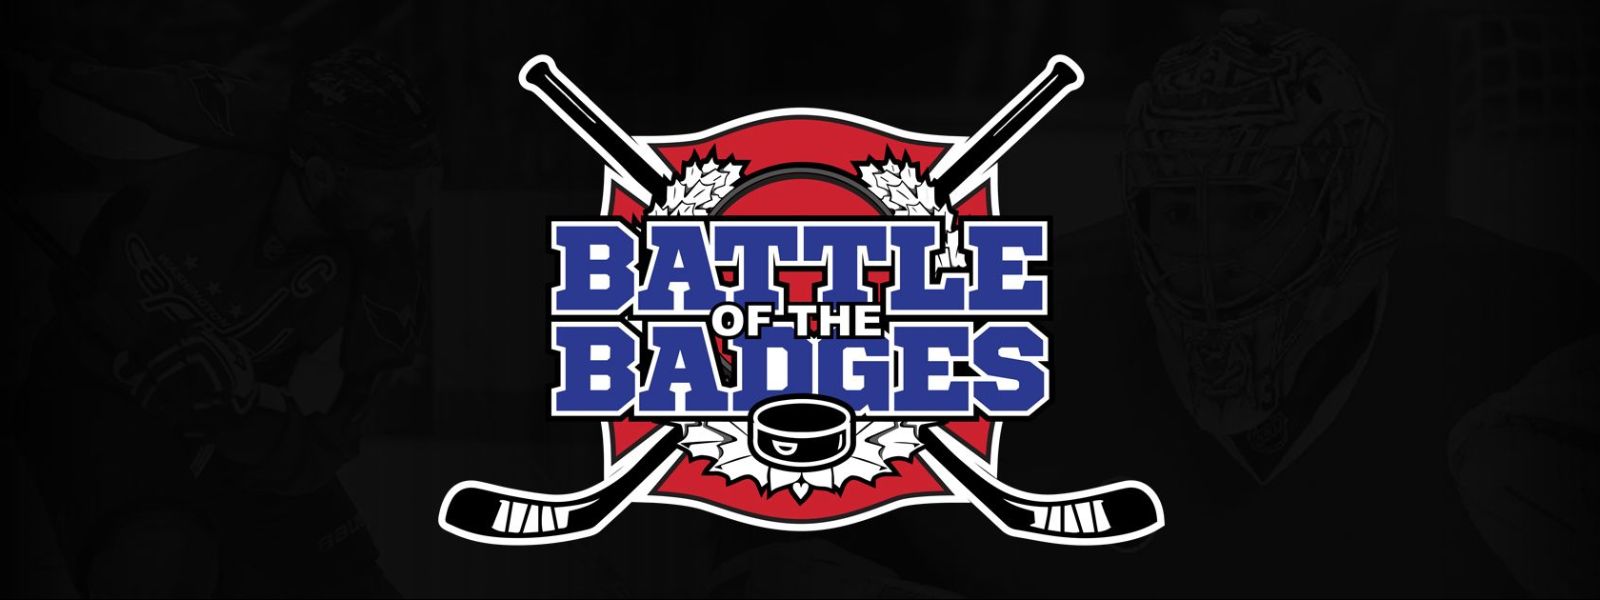 Battle of the Badges